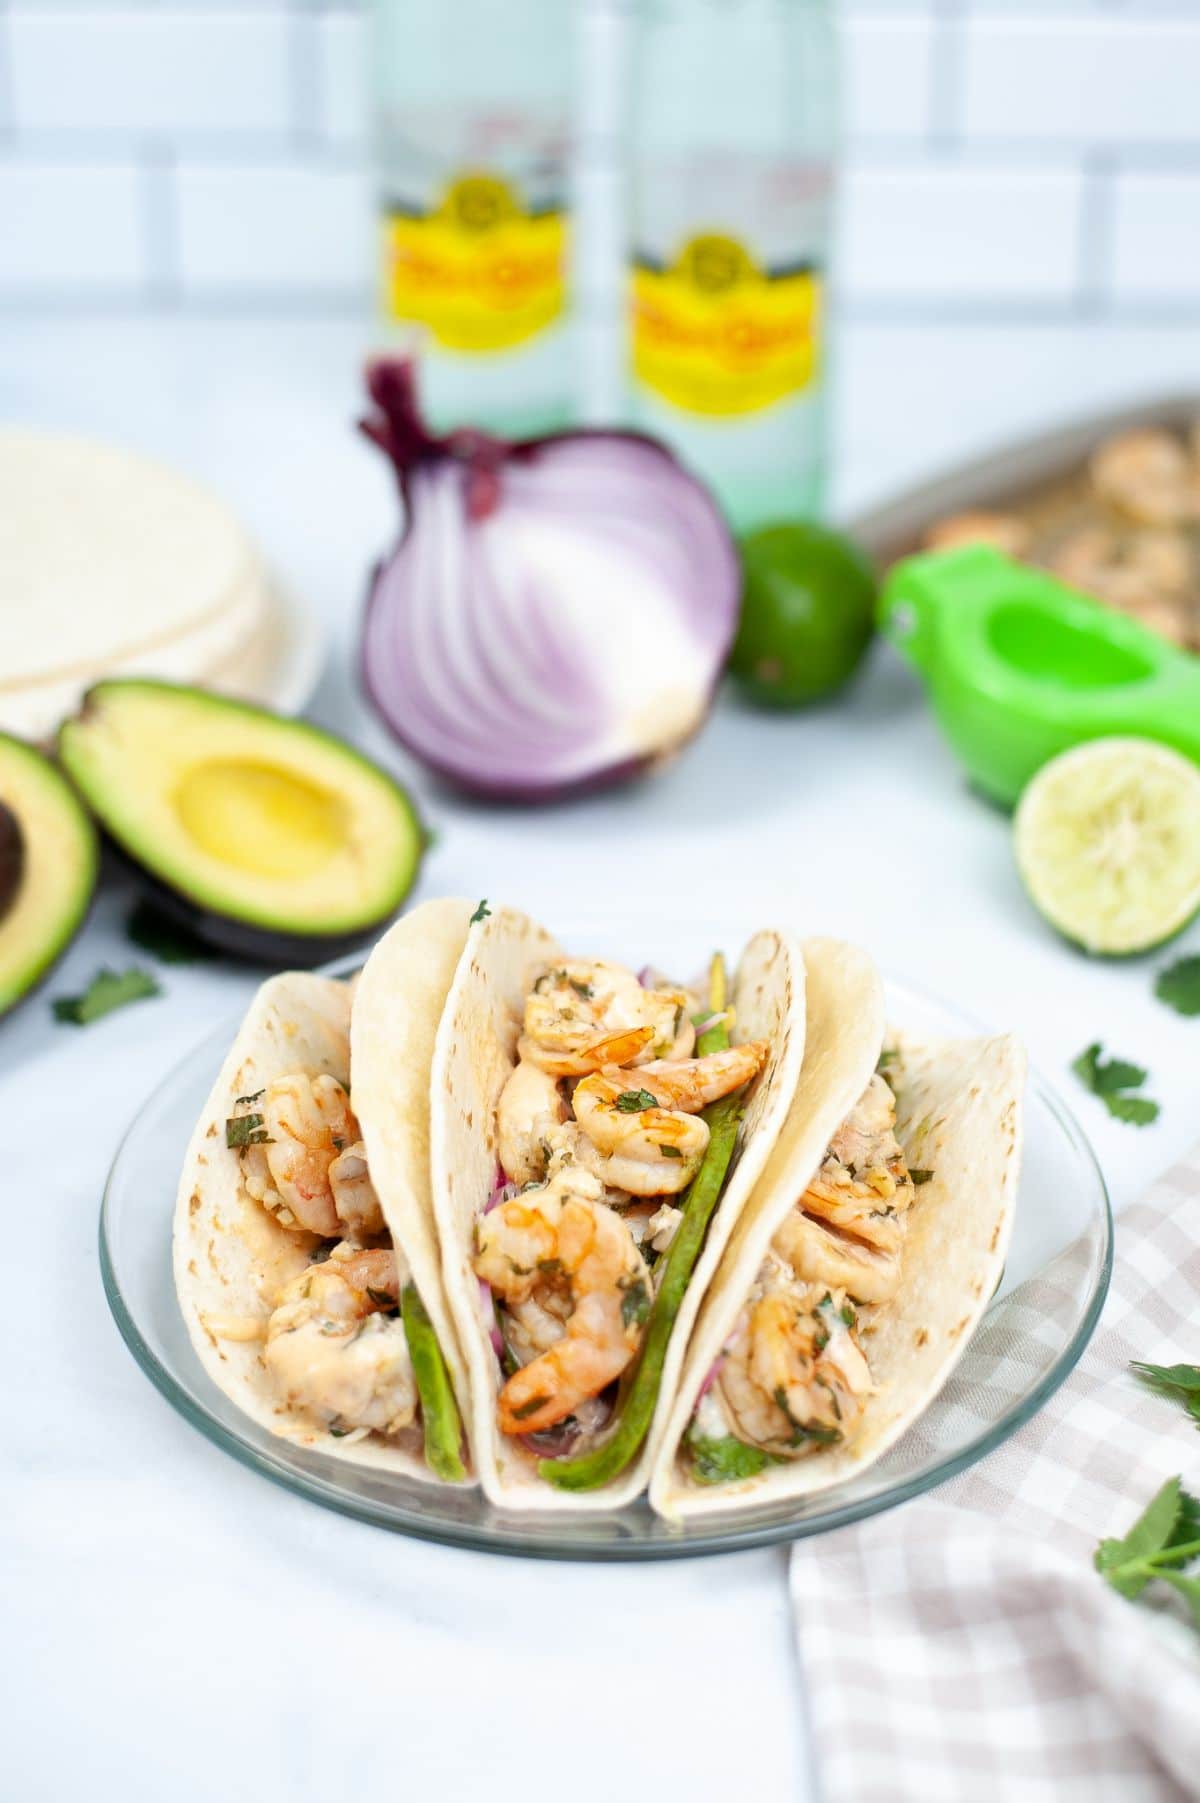 Sheet Pan Shrimp Tacos on a glass plate with an avocado, onion and limes blurred in the background